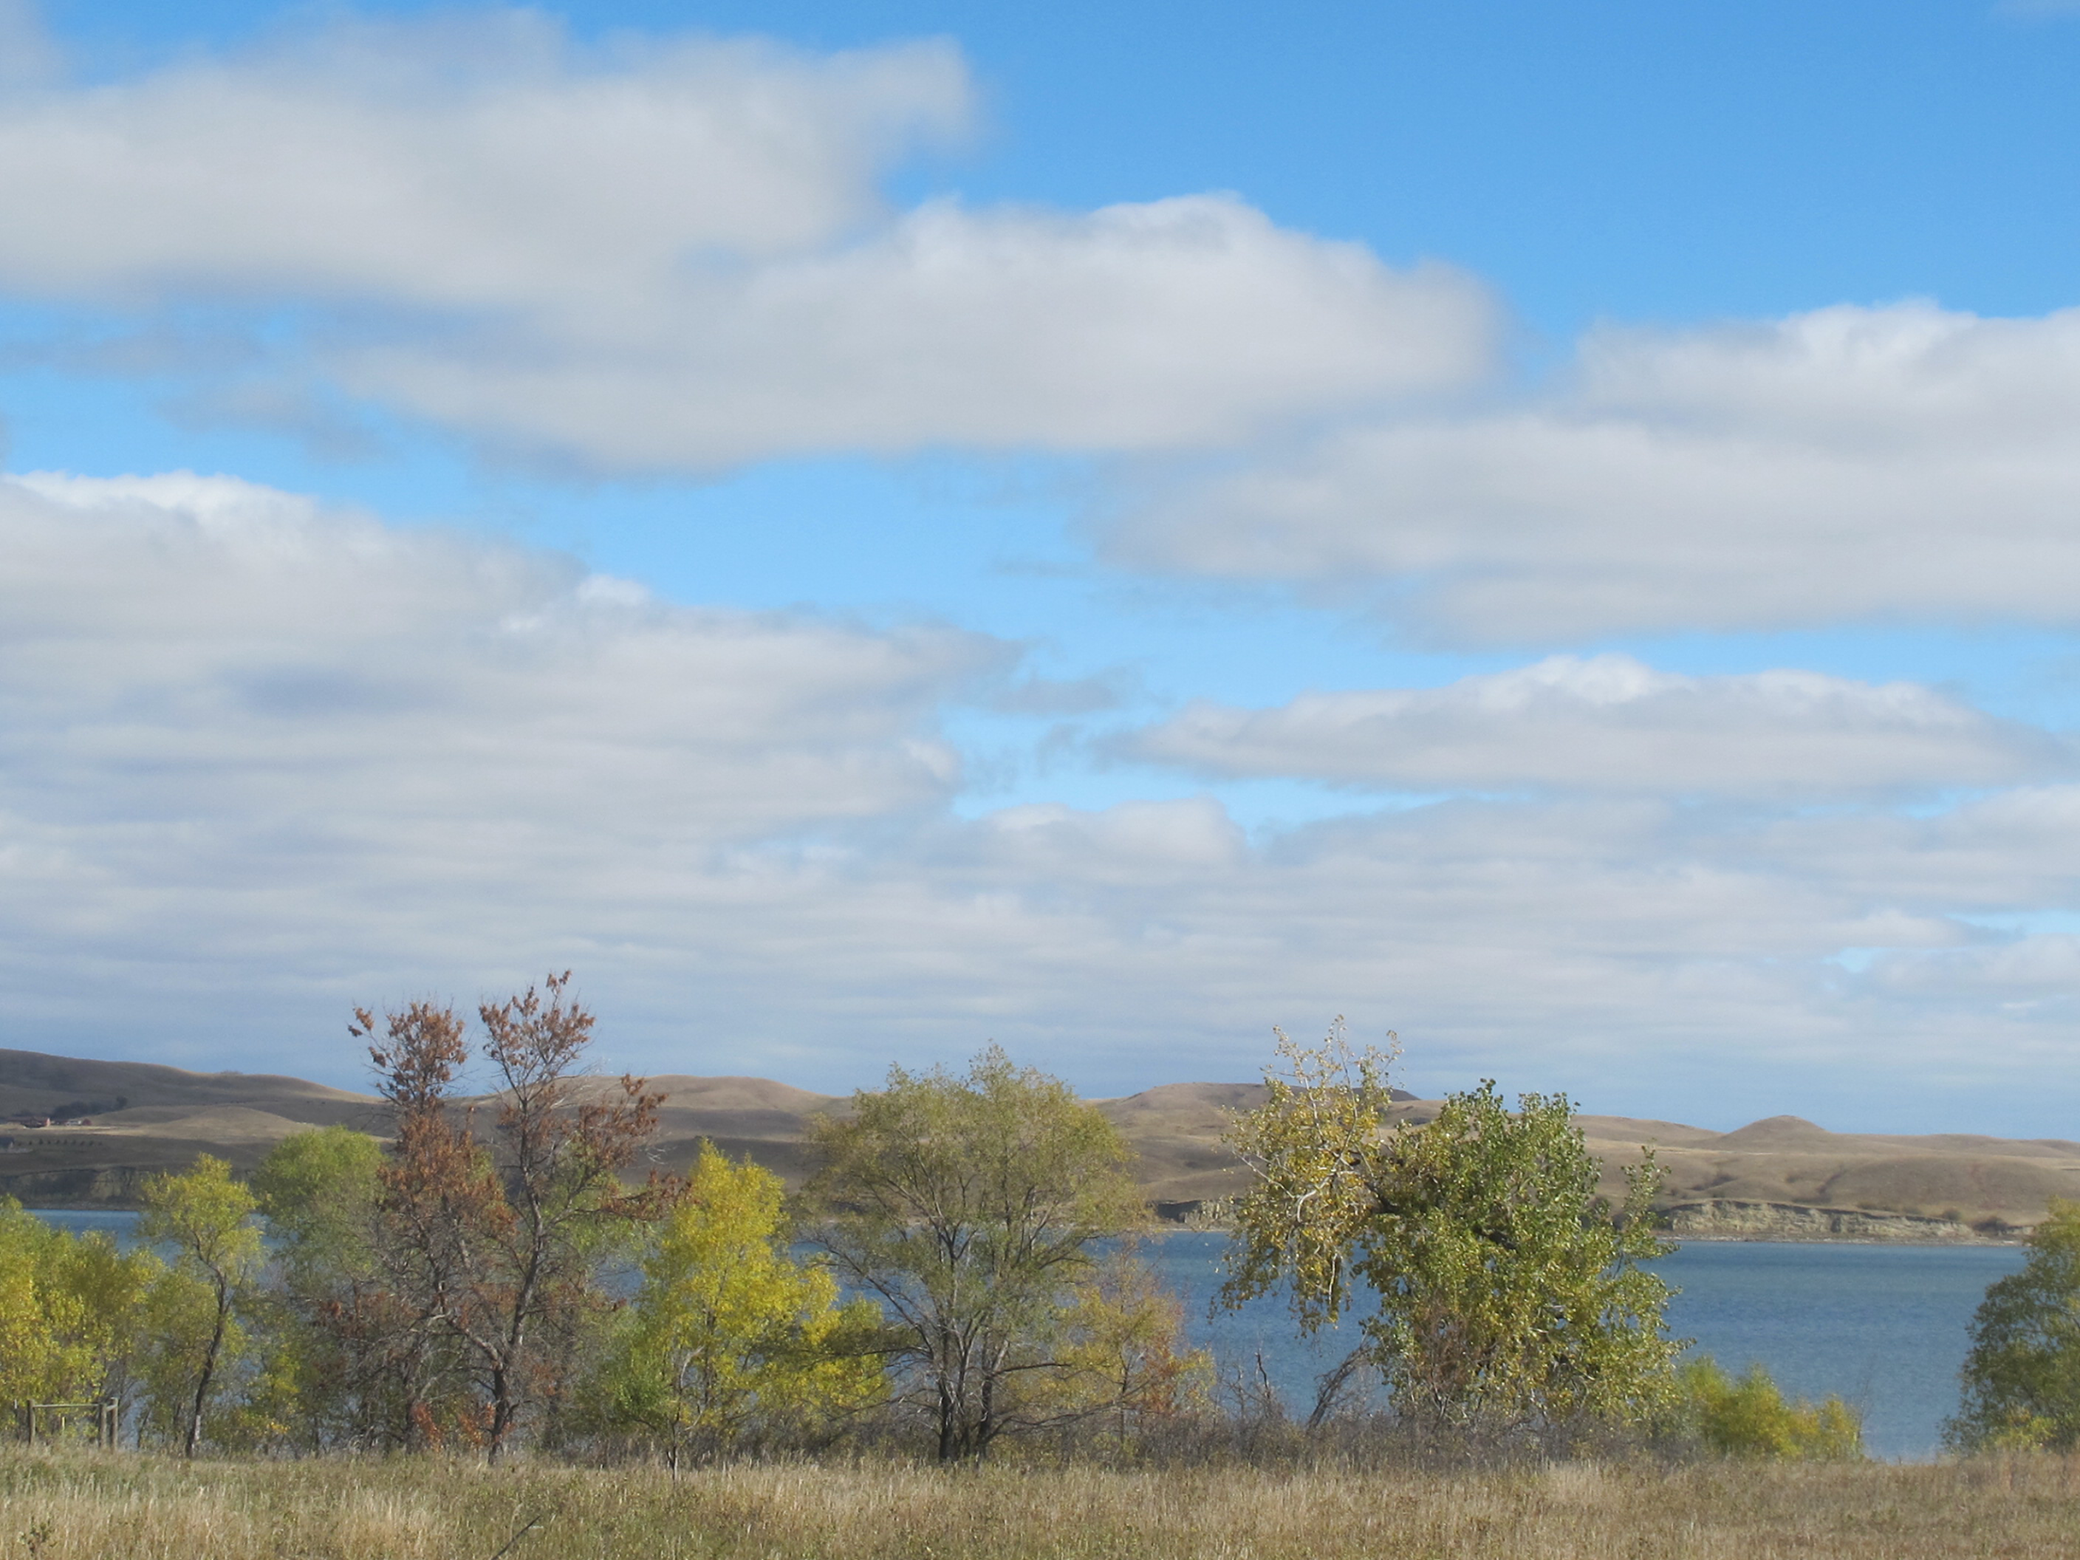 Lake Oahe, near the town of Cannon Ball, ND, 2016. Photograph by Rebecca Bengal.